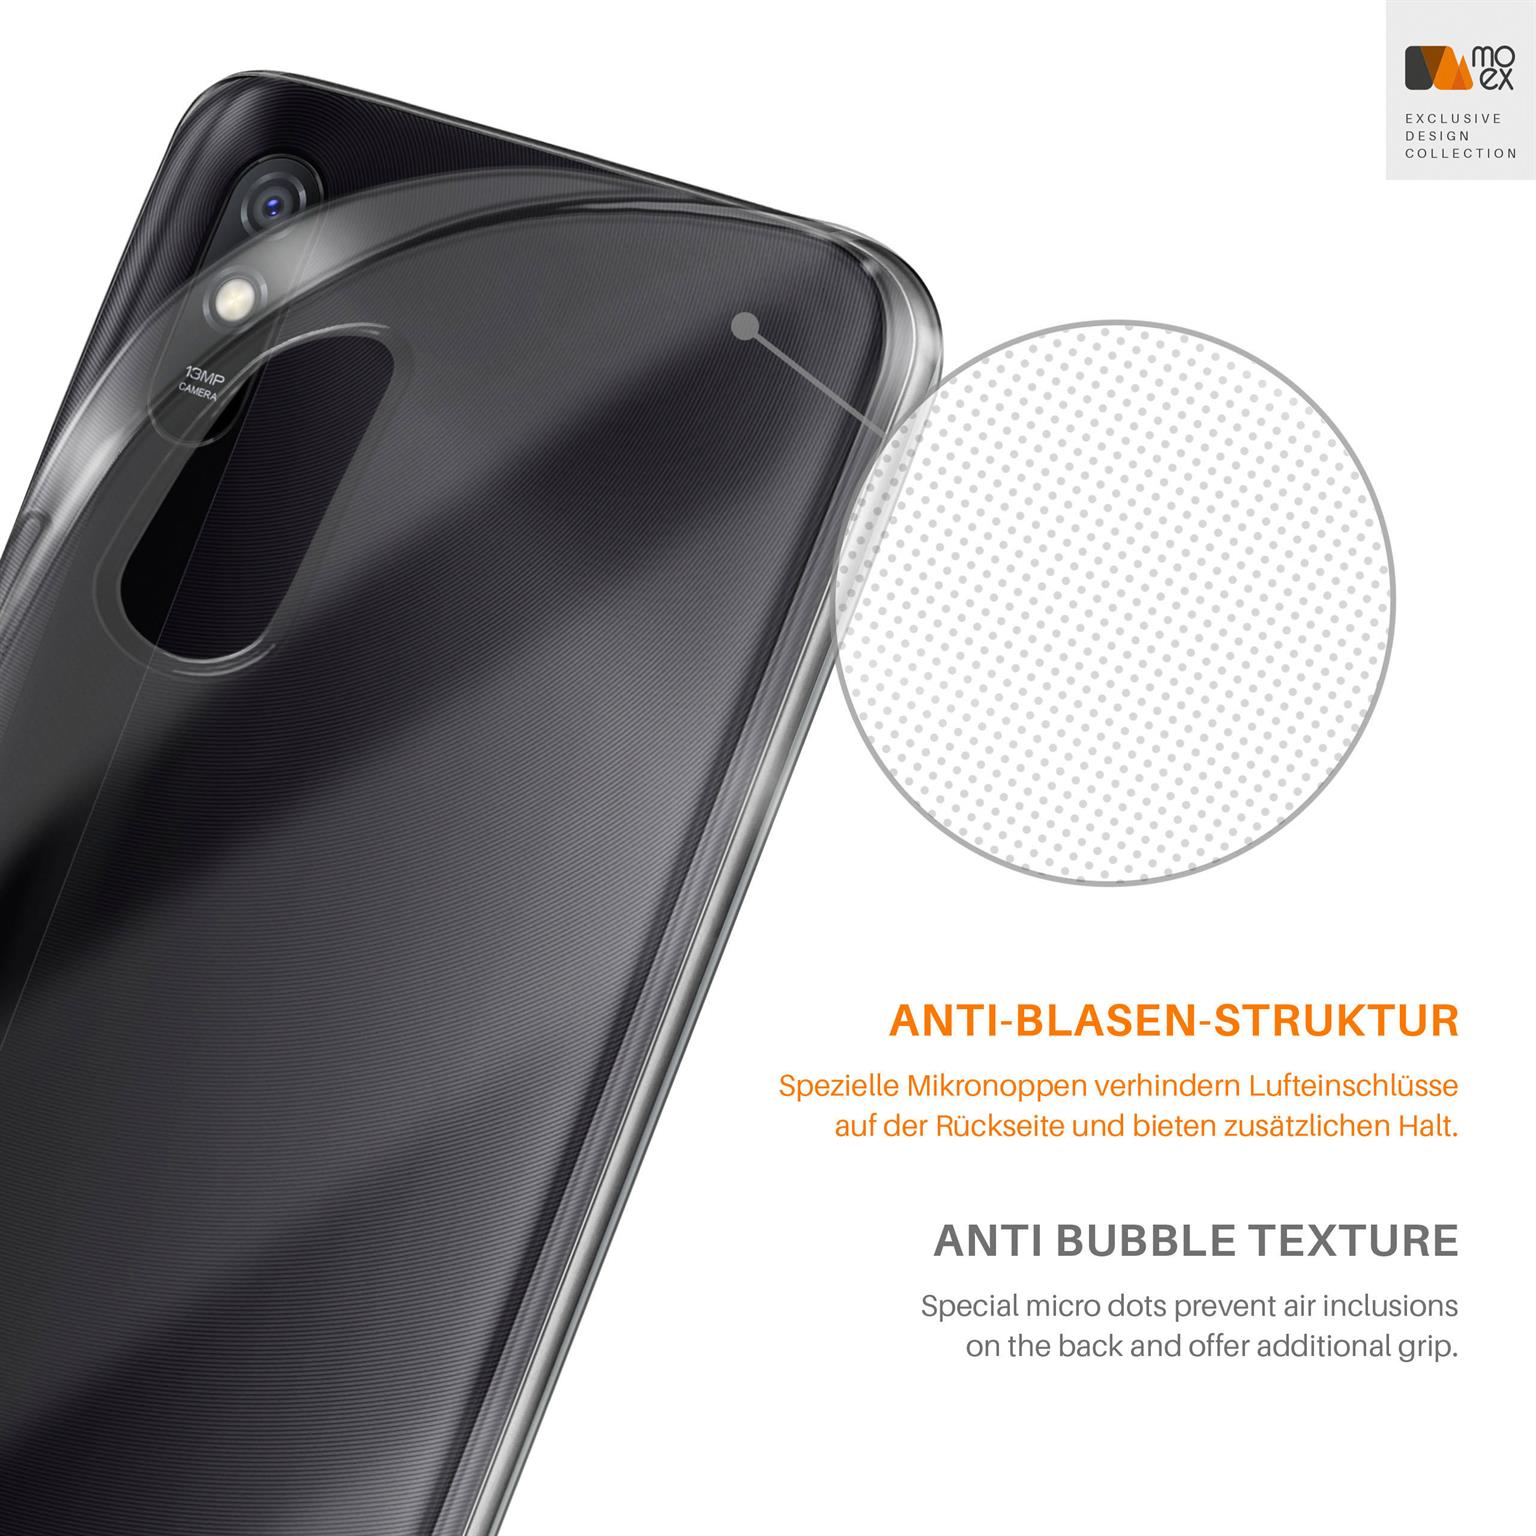 Case, Crystal-Clear MOEX Backcover, 9AT, Xiaomi, Aero Redmi